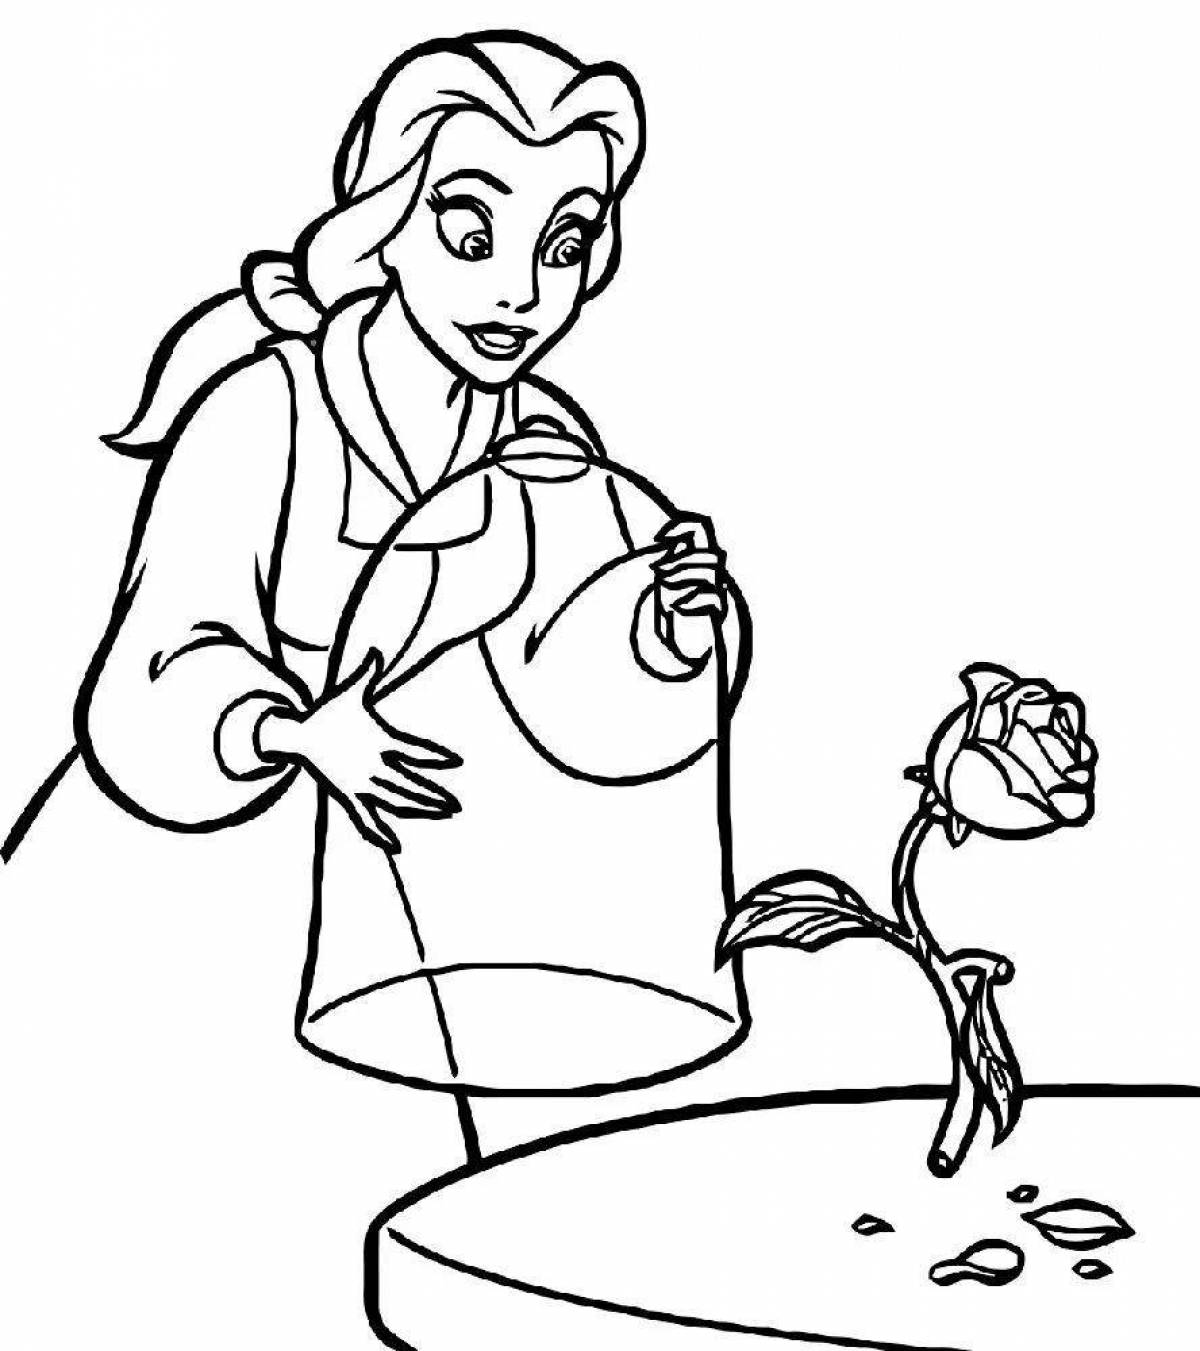 Belle and monster coloring page